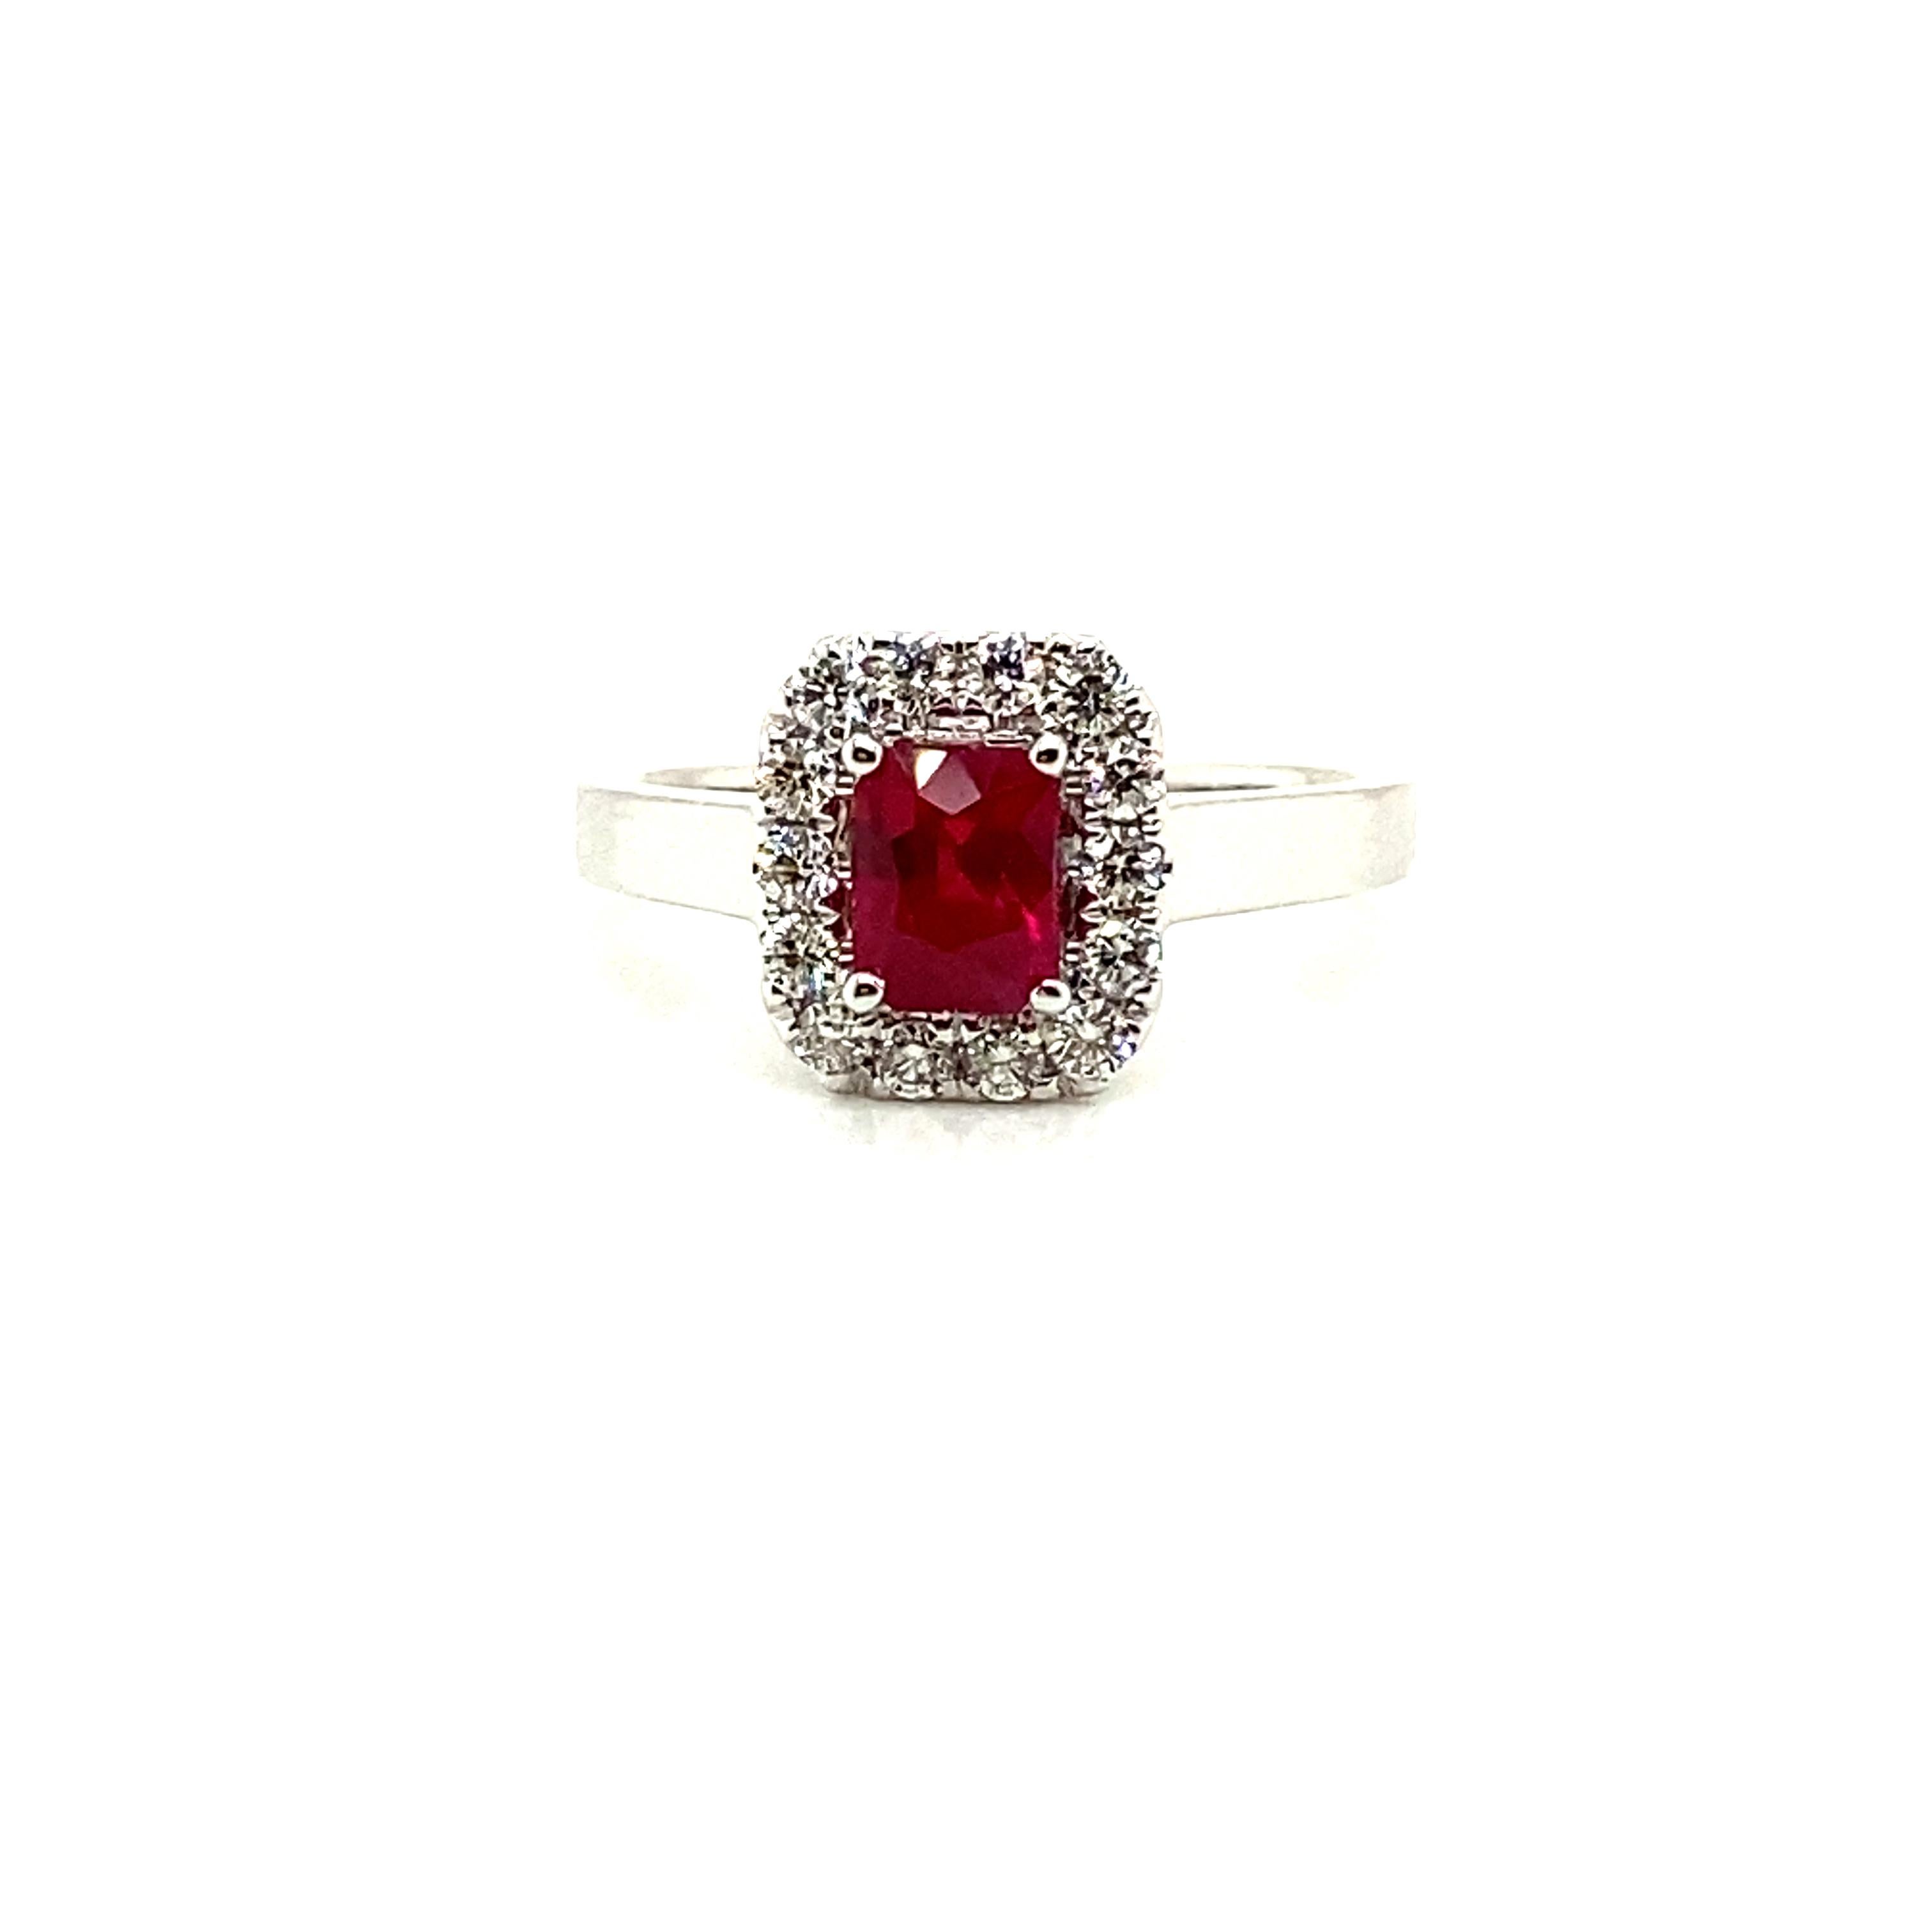 1.10 Carat Octagon-Cut Pigeon's Blood Red Ruby and White Diamond Ring:

A beautiful ring, it features an octagon-cut vivid red ruby weighing 1.10 carat surrounded by a halo of white round-brilliant cut diamonds weighing 0.34 carat. The ruby is of